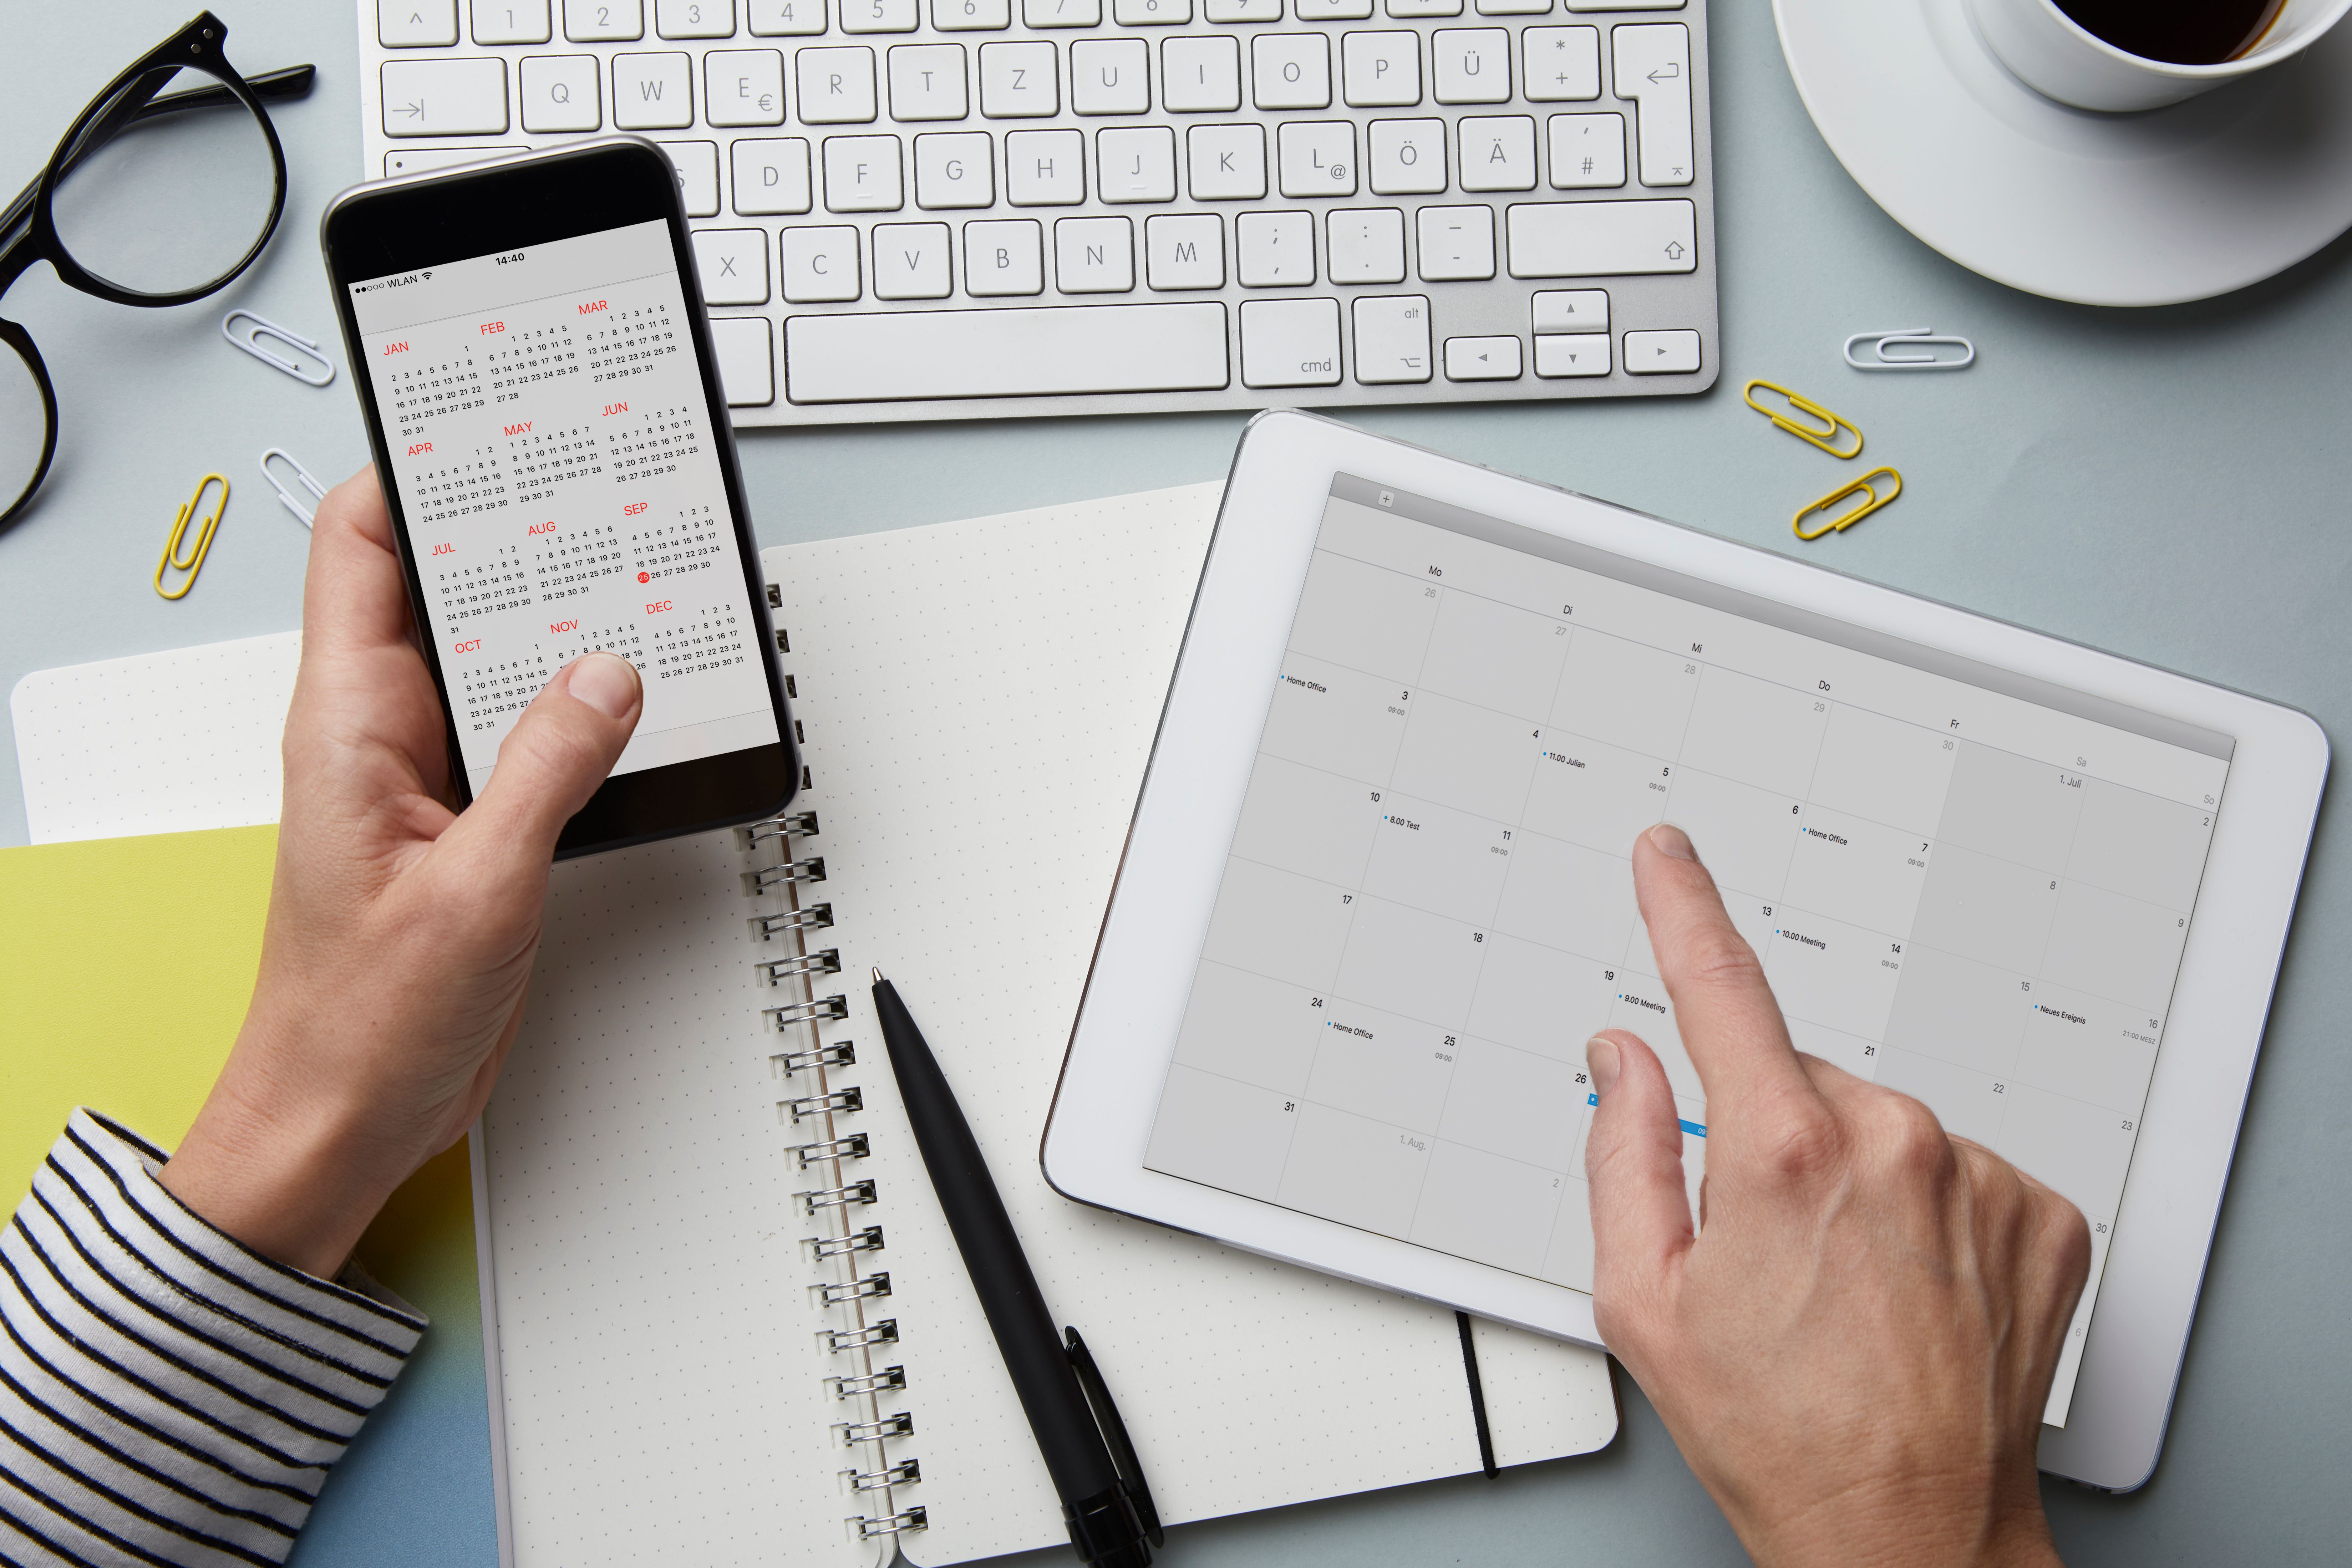 Calendars open on a phone and tablet. | Source: Getty Images